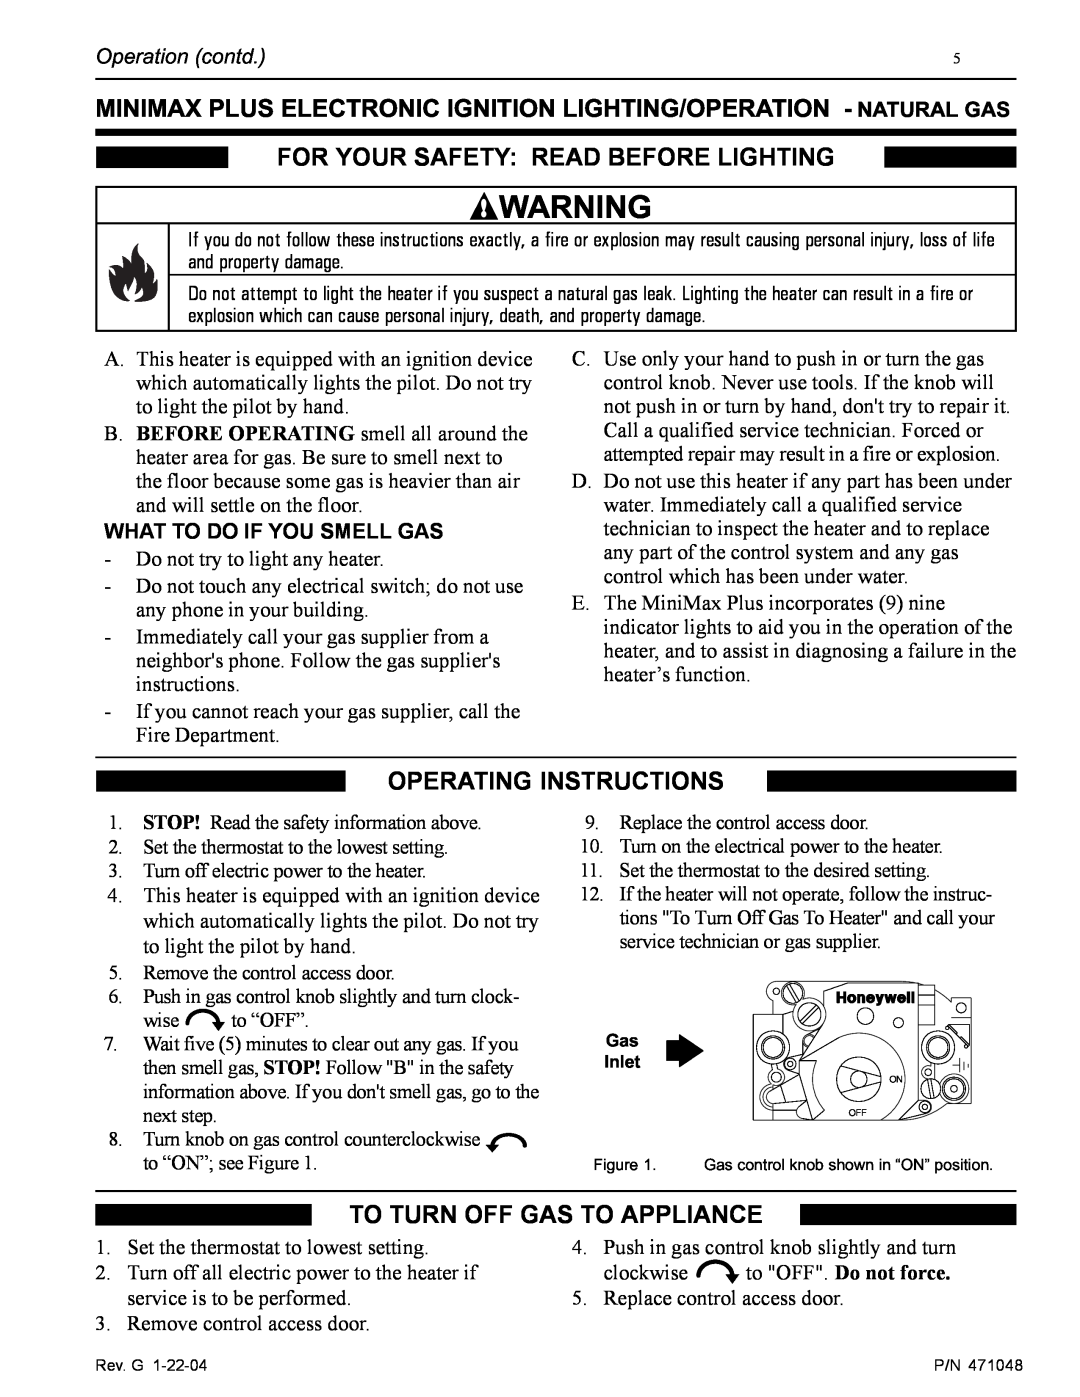 Pentair 100 installation manual For Your Safety Read Before Lighting, Operating Instructions, To Turn Off Gas To Appliance 